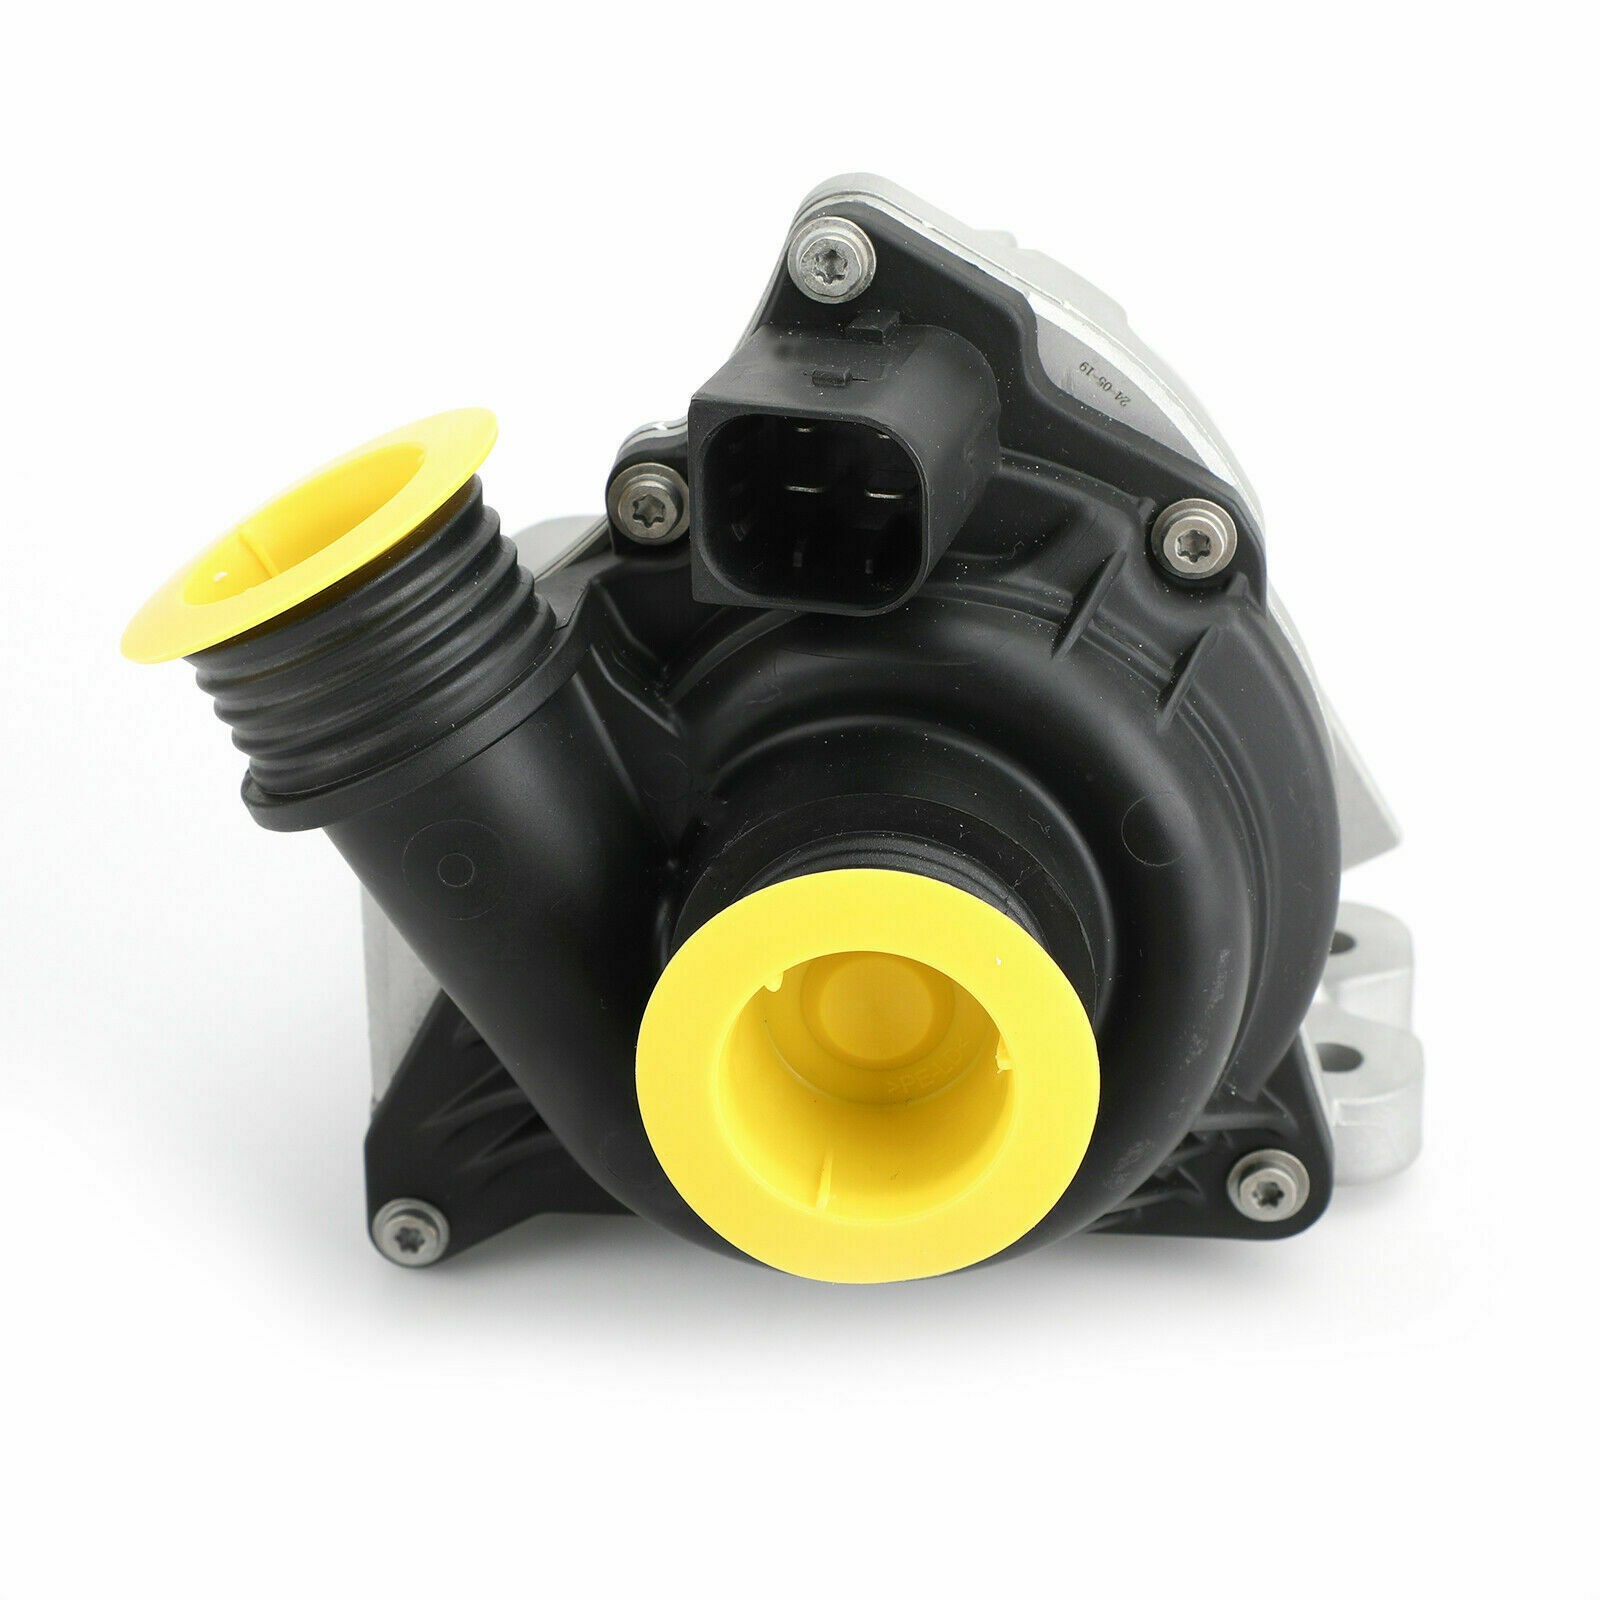 Suitable for BMW X3 X5 E60 Electric Engine Water Pump 11517586925 11517632426